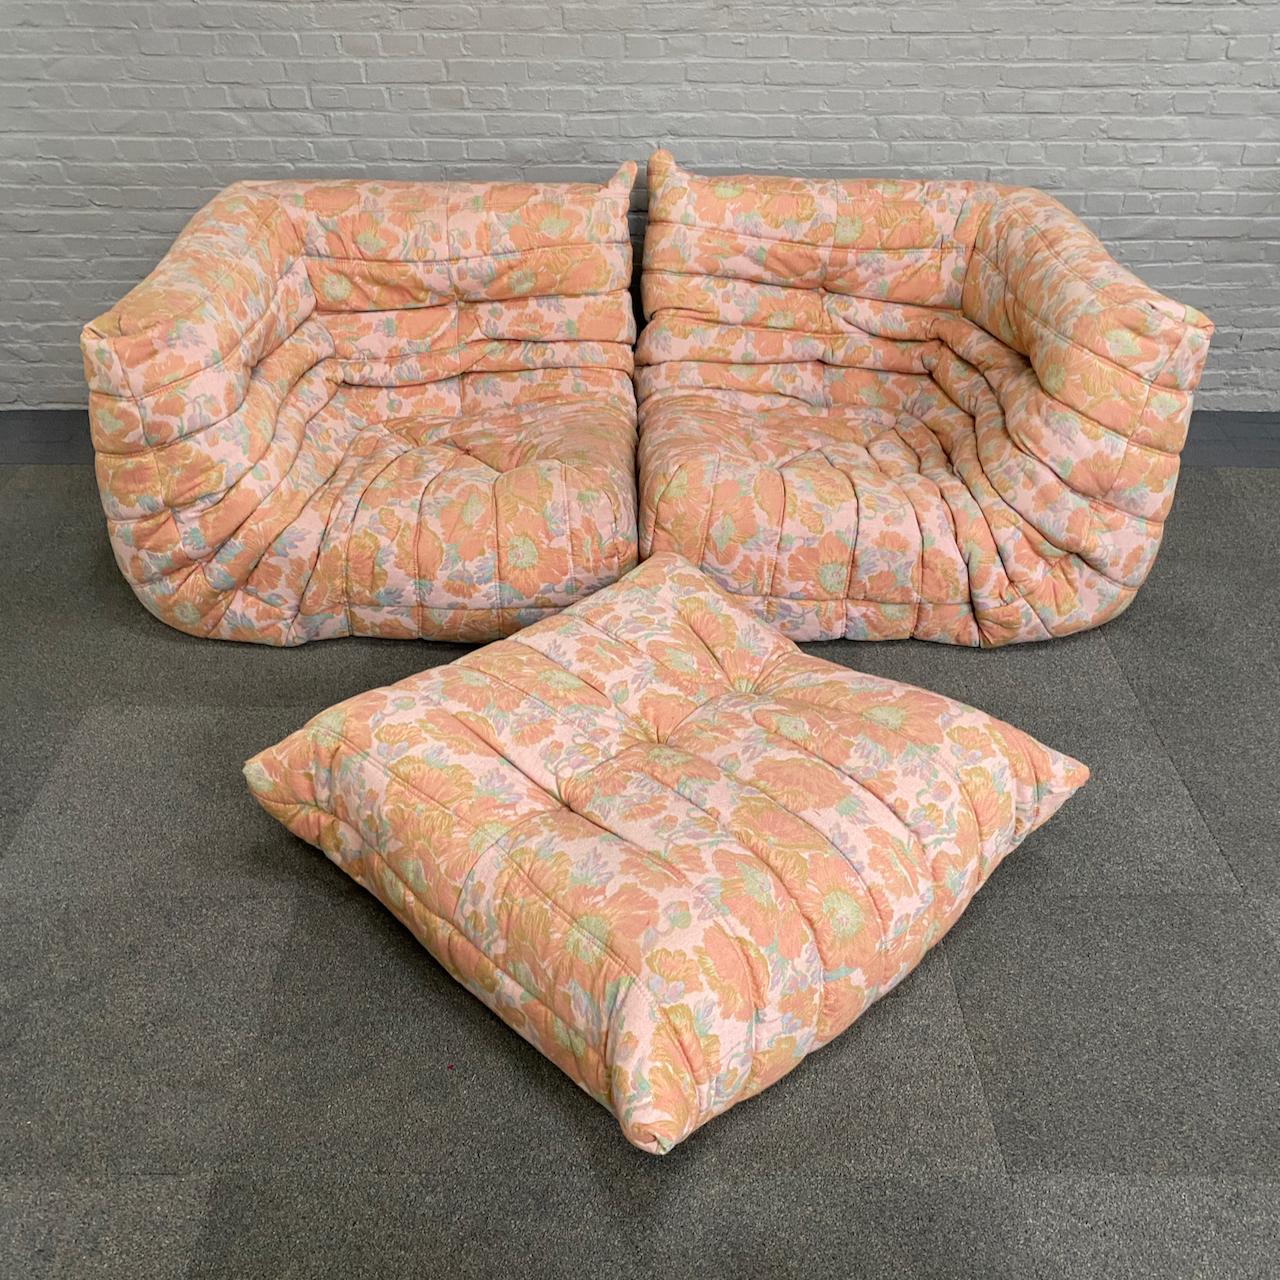 ORIGINAL LIGNE ROSET FLORAL SOFA SET BY MICHEL DUCAROY - FRANCE 1970'S


Amazing 4 piece Togo set: loveseat, 2 corners and ottoman.
The whole set still has the original fabric from the 1970's in what we think was a custom order at the time.
The